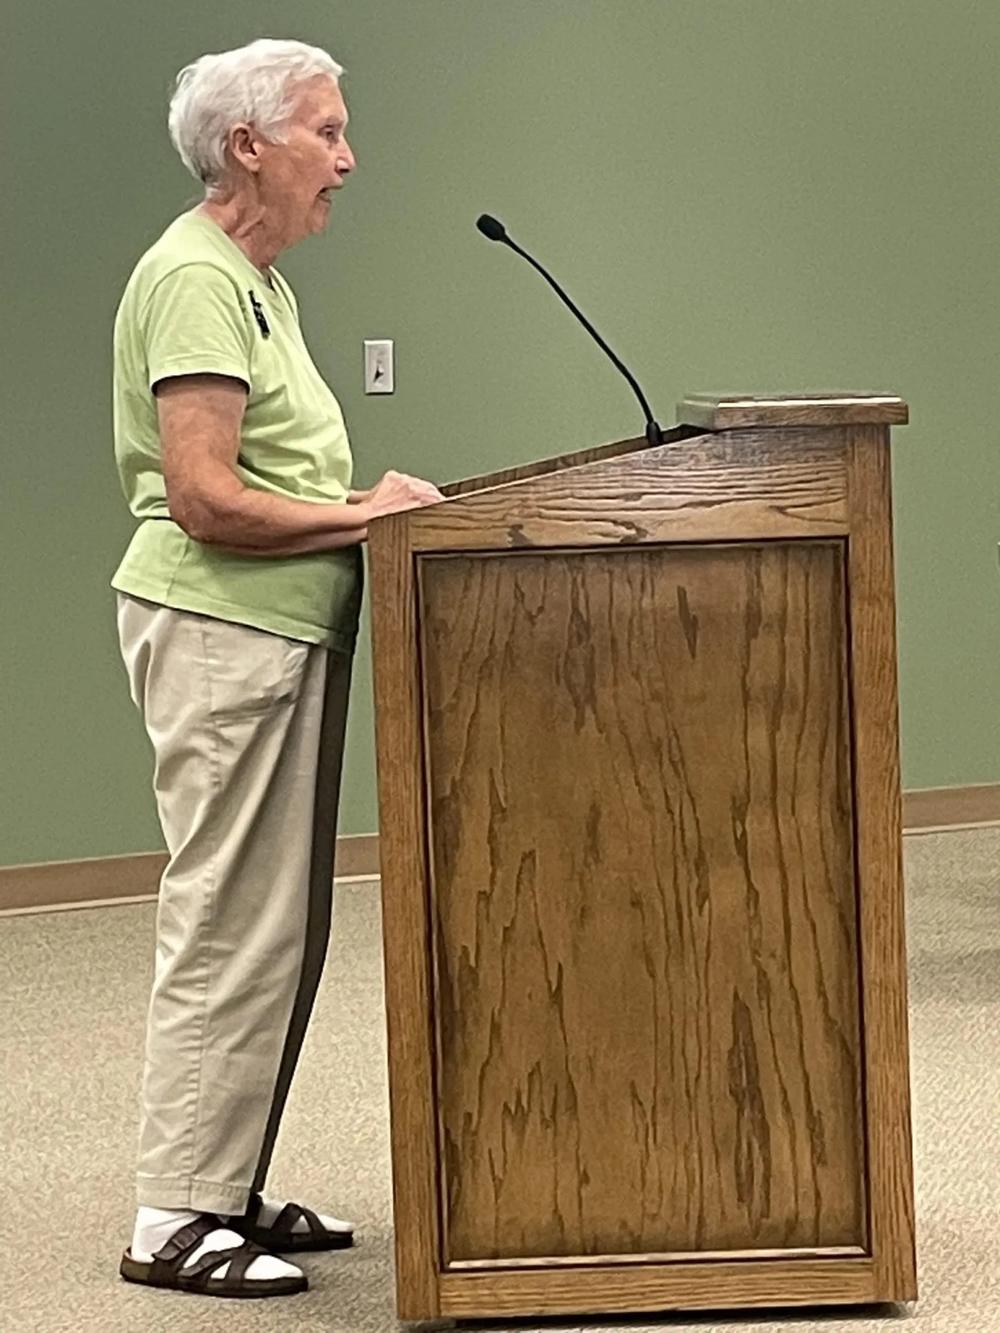 Camden resident Jackie Eichhorn comments at a June 2022 Camden County Commission meeting. Mary Landers/The Current